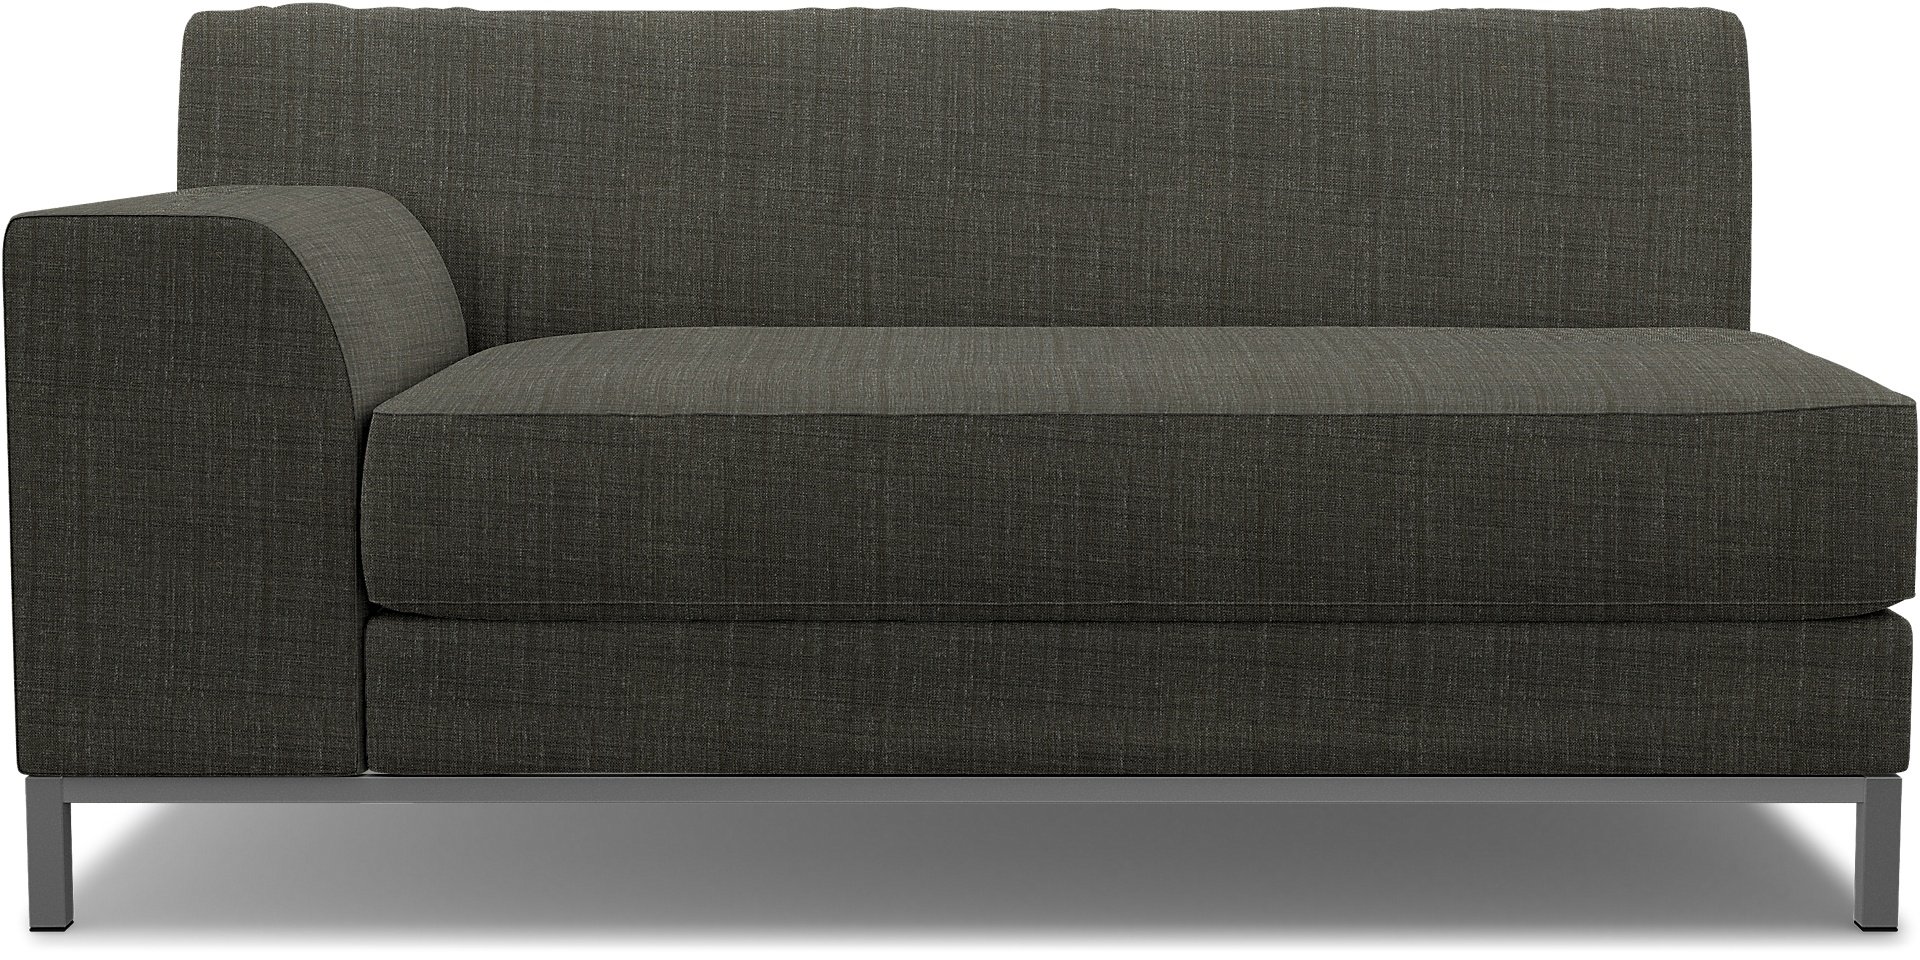 IKEA - Kramfors 2 Seater Sofa with Left Arm Cover, Mole Brown, Boucle & Texture - Bemz